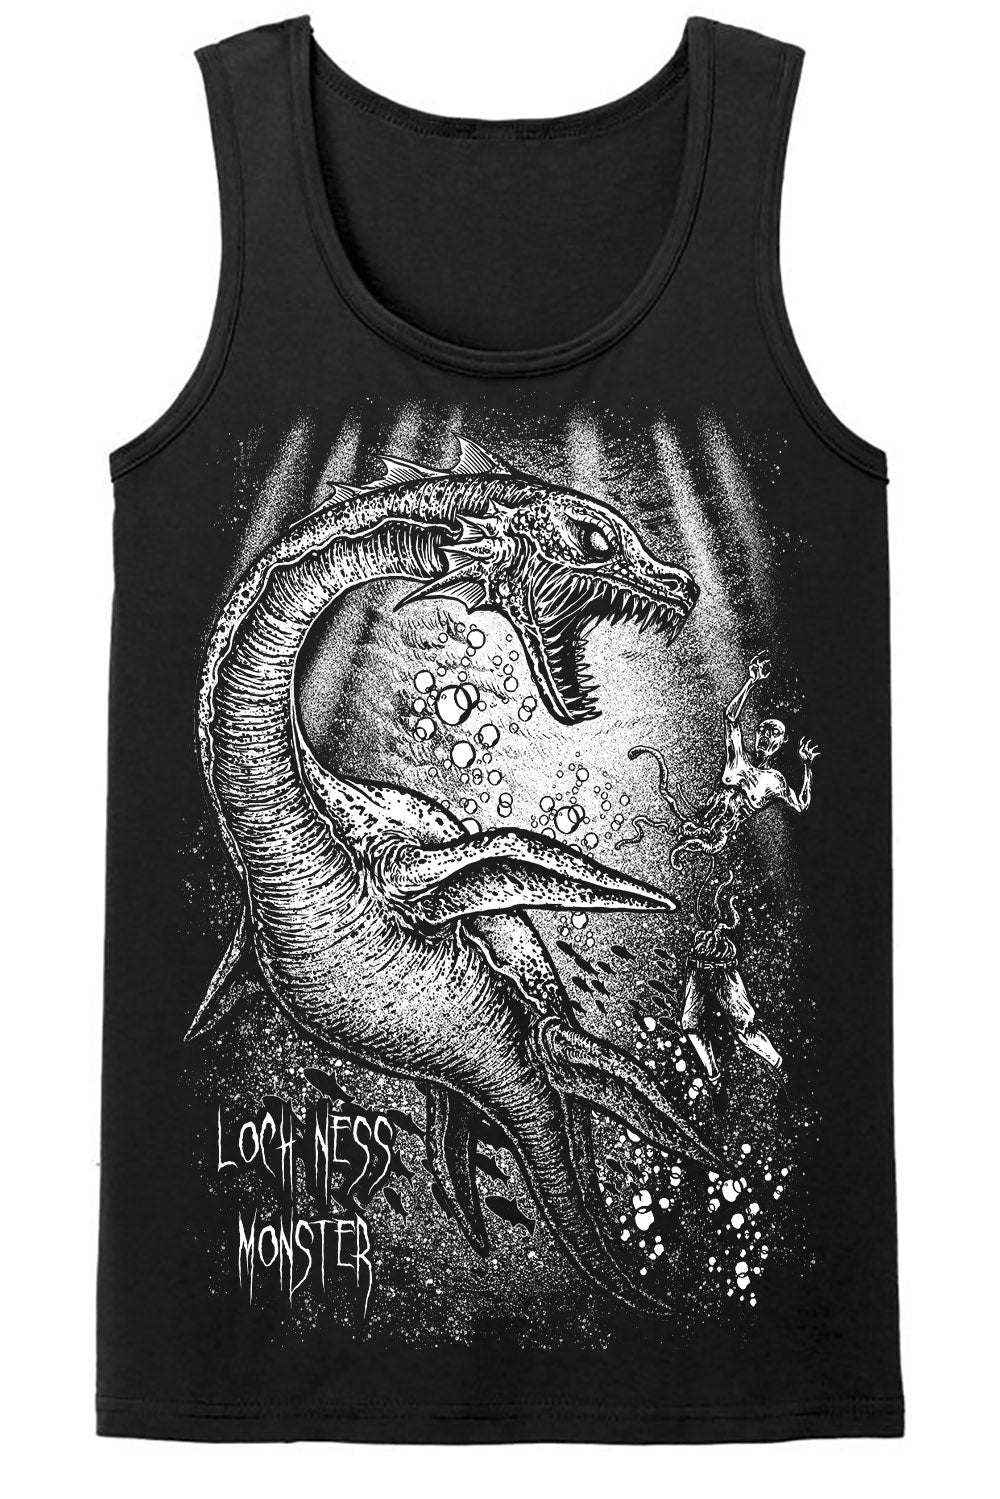 Loch Ness Monster Tee [Multiple Styles Available]